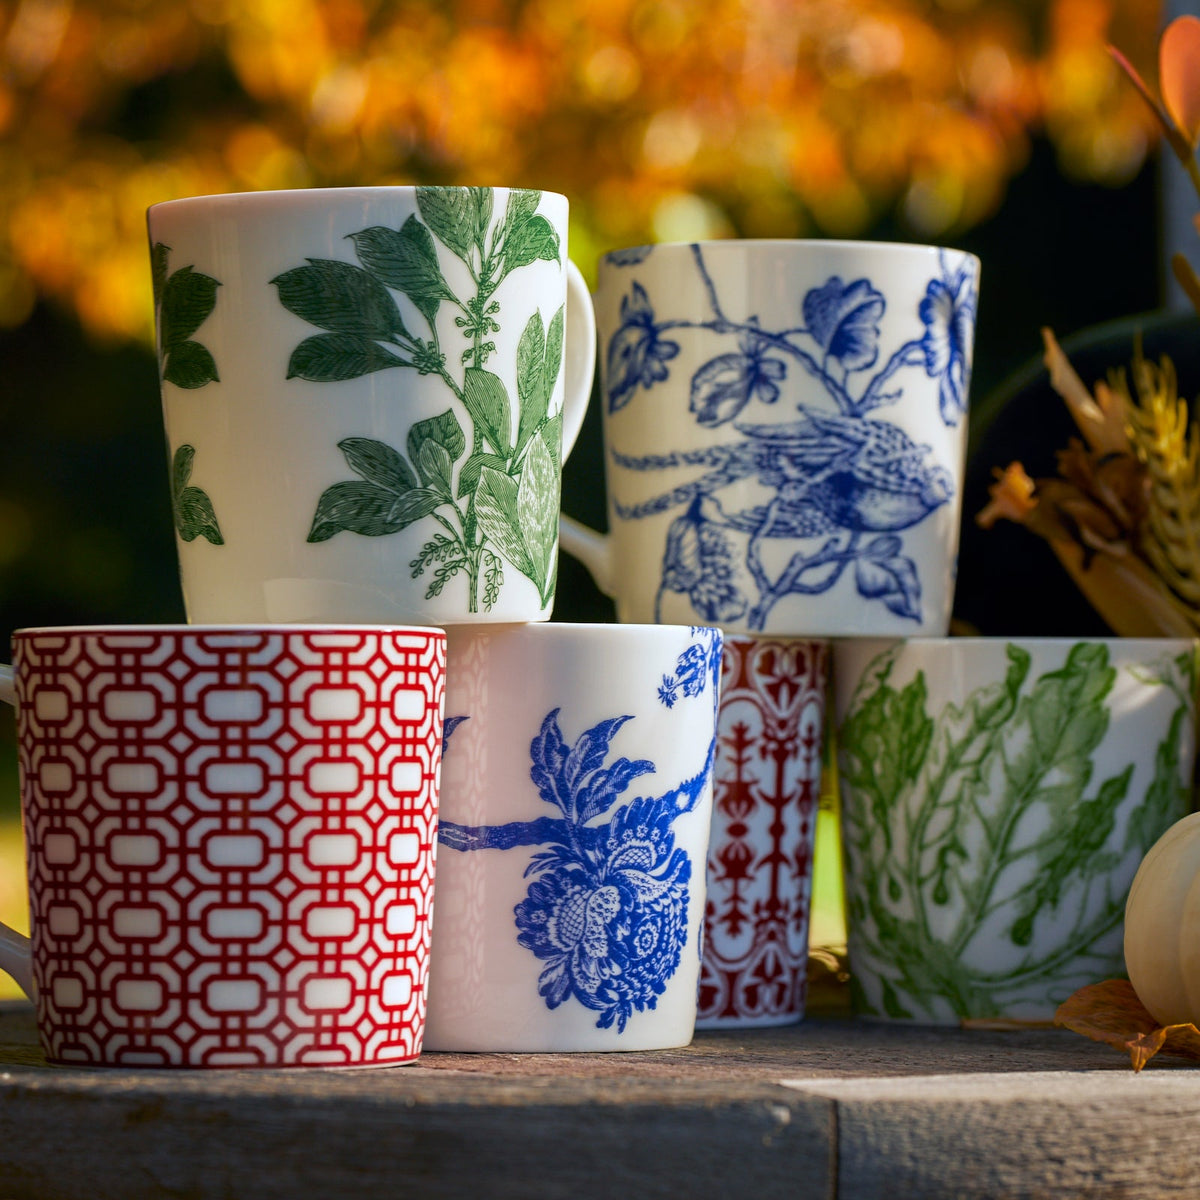 Caskata Artisanal Home&#39;s collection of Freya mugs with green floral designs sitting on a wooden table.